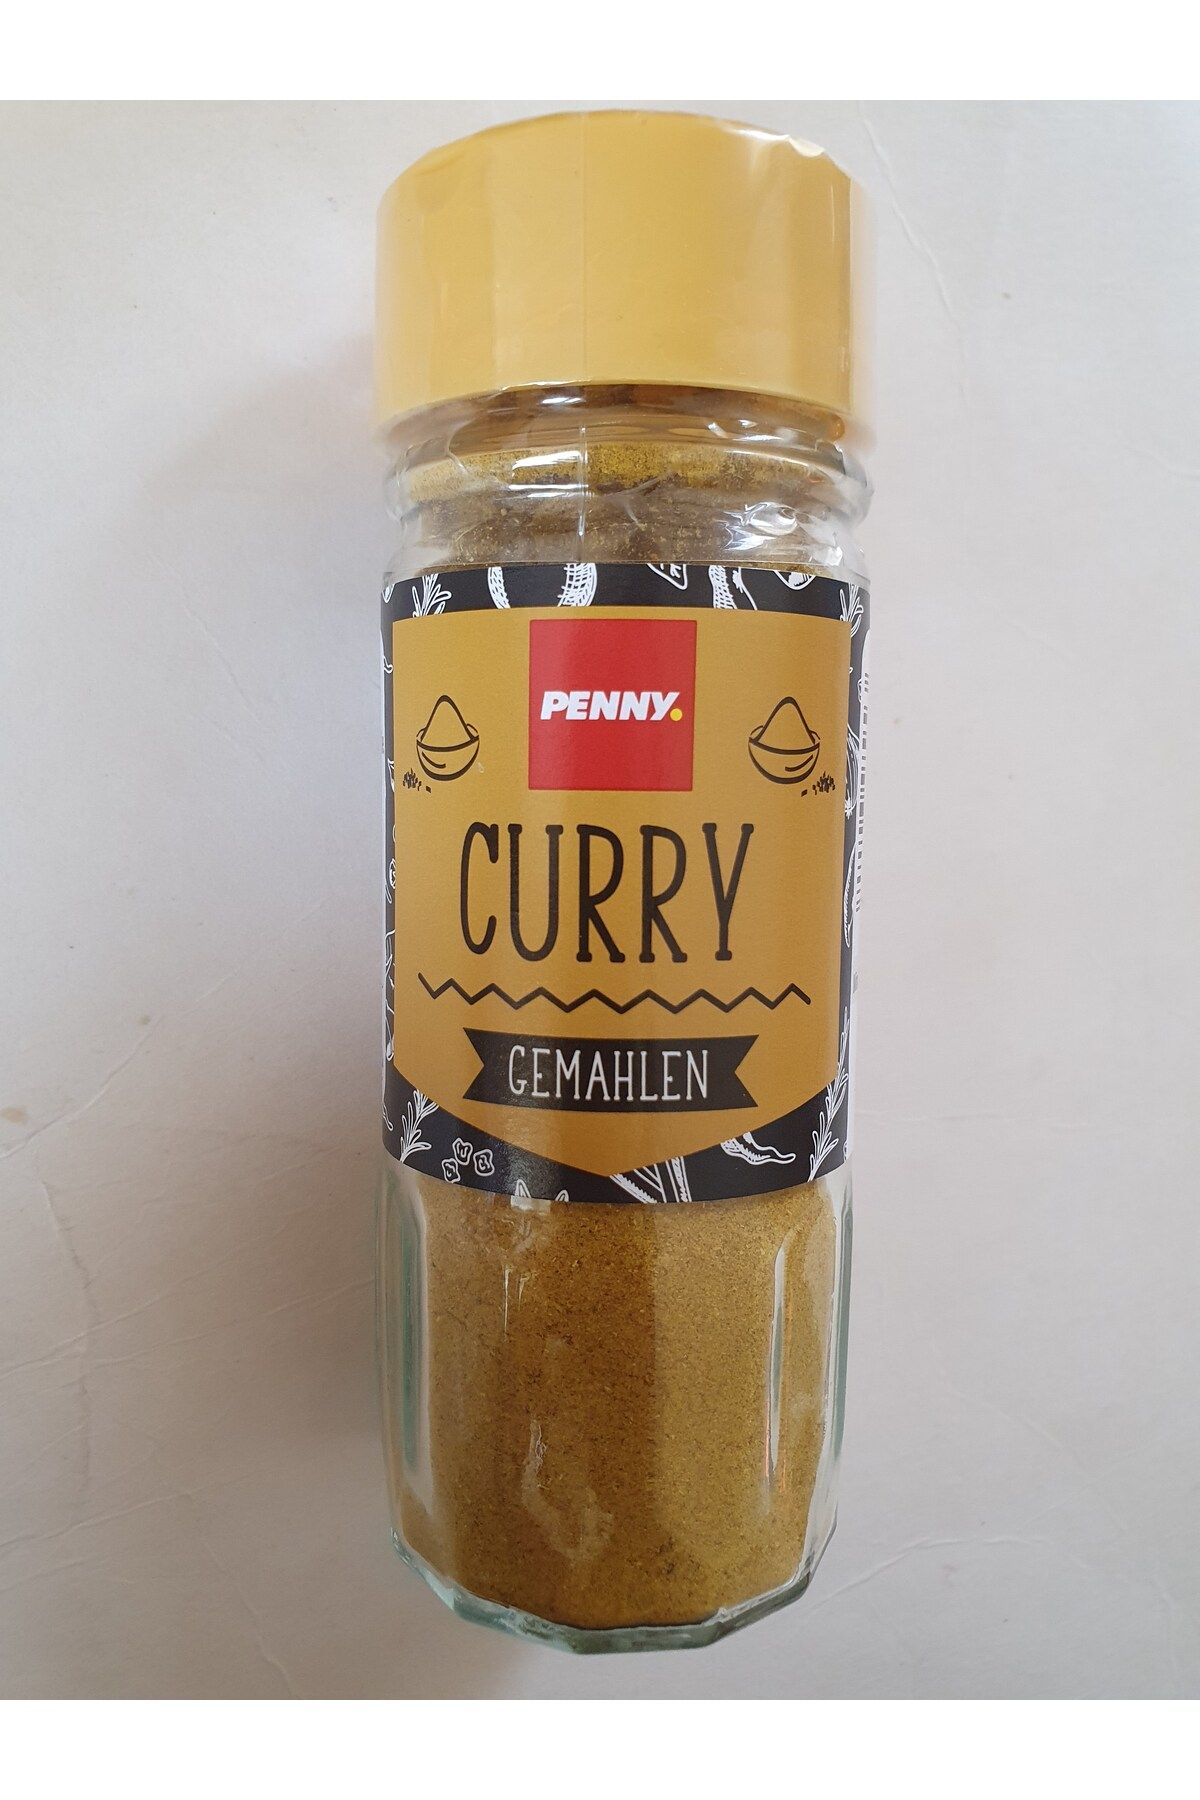 Penny CURRY 45g